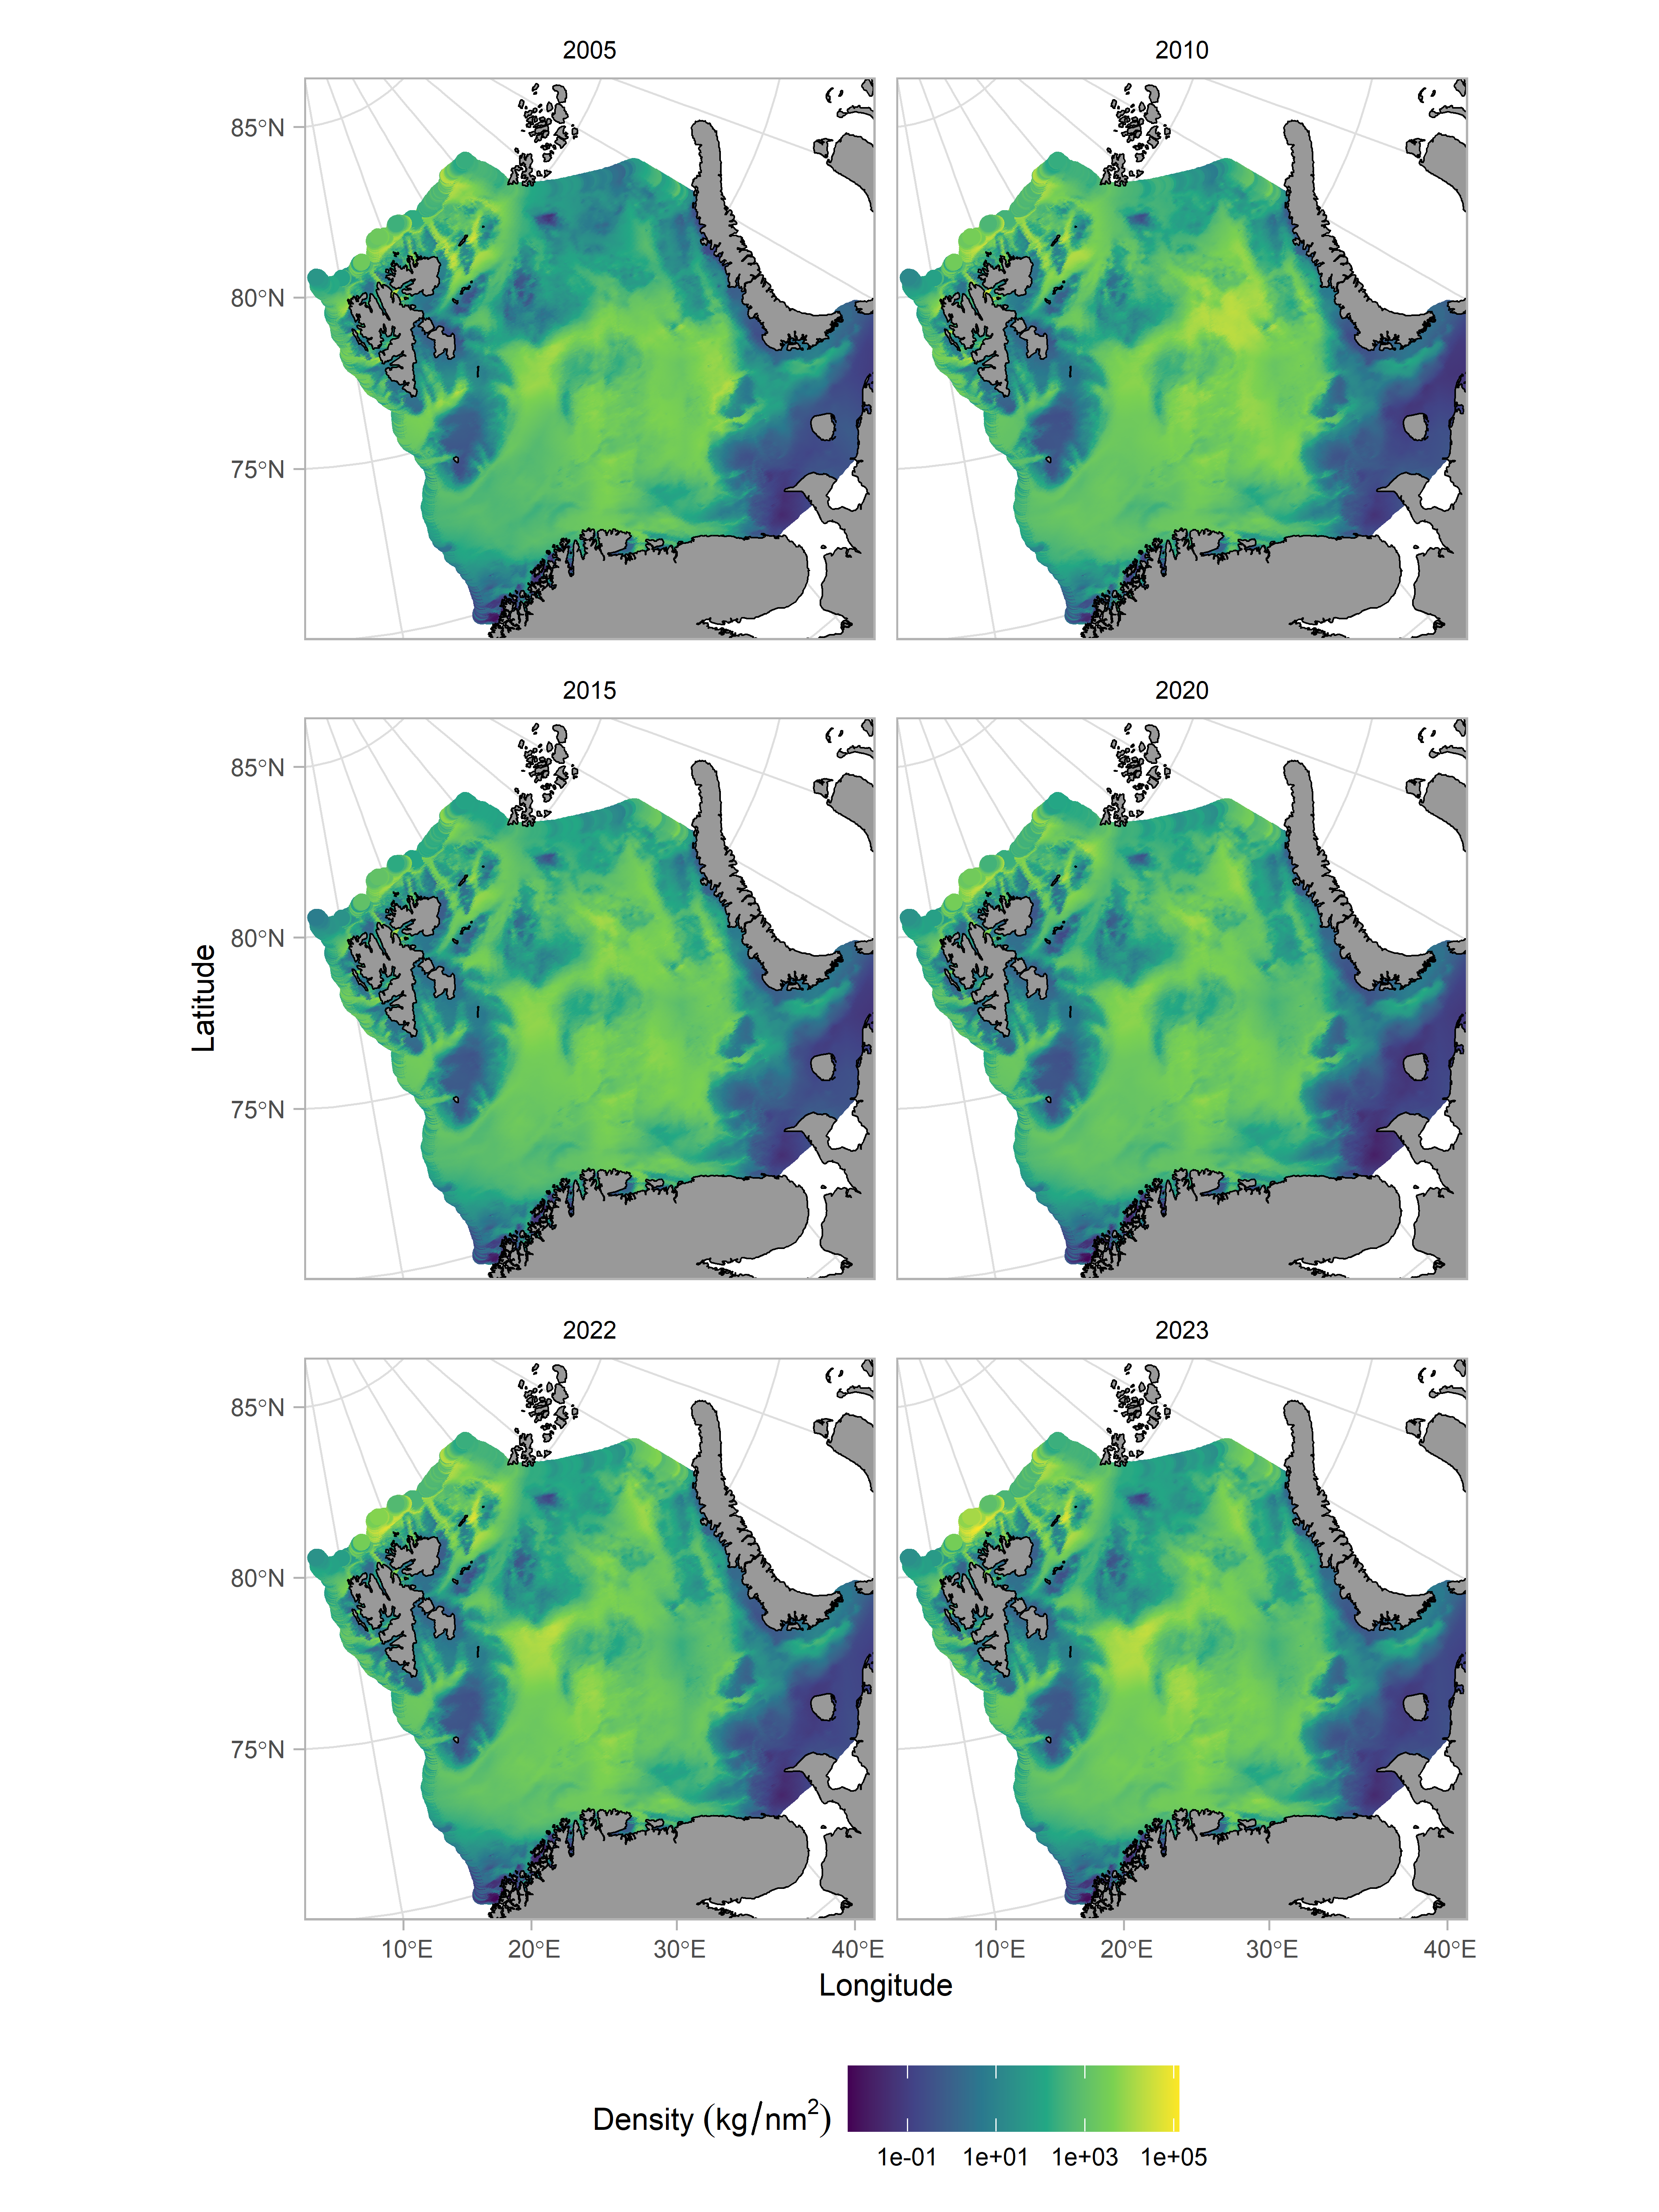 Figure 6: Spatial distribution of shrimp biomass based on ecosystem system survey data. Biomass is predicted with a GAMM including spatio-temporal correlation that was used to produce the standardized survey index.